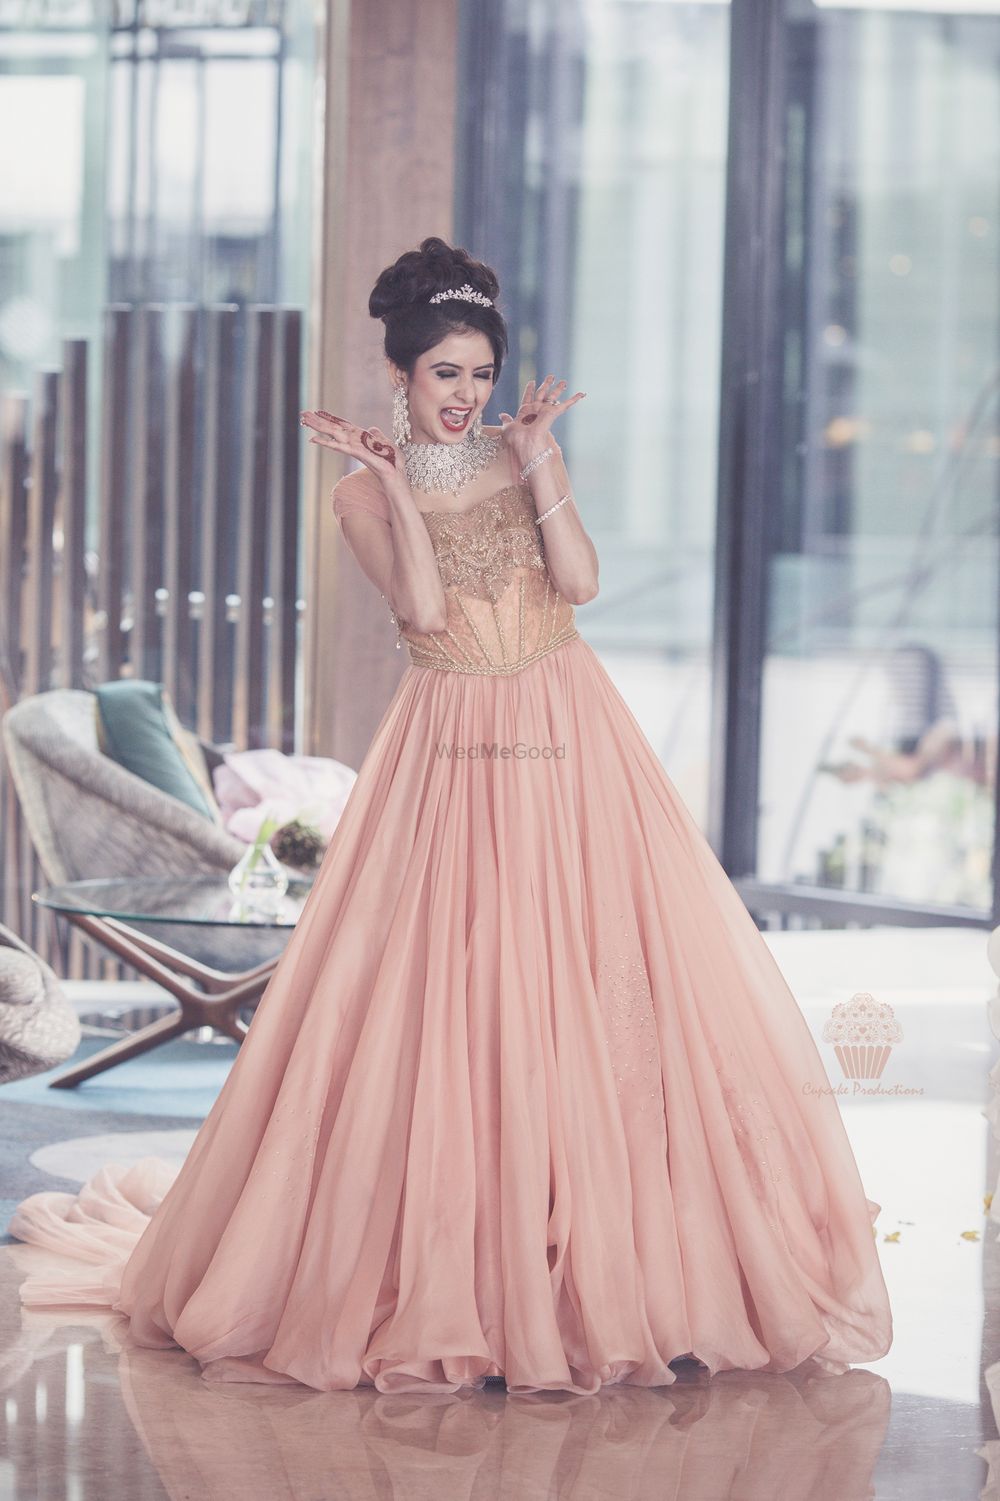 Photo of Peach Engagement Gown by Shantanu Nikhil